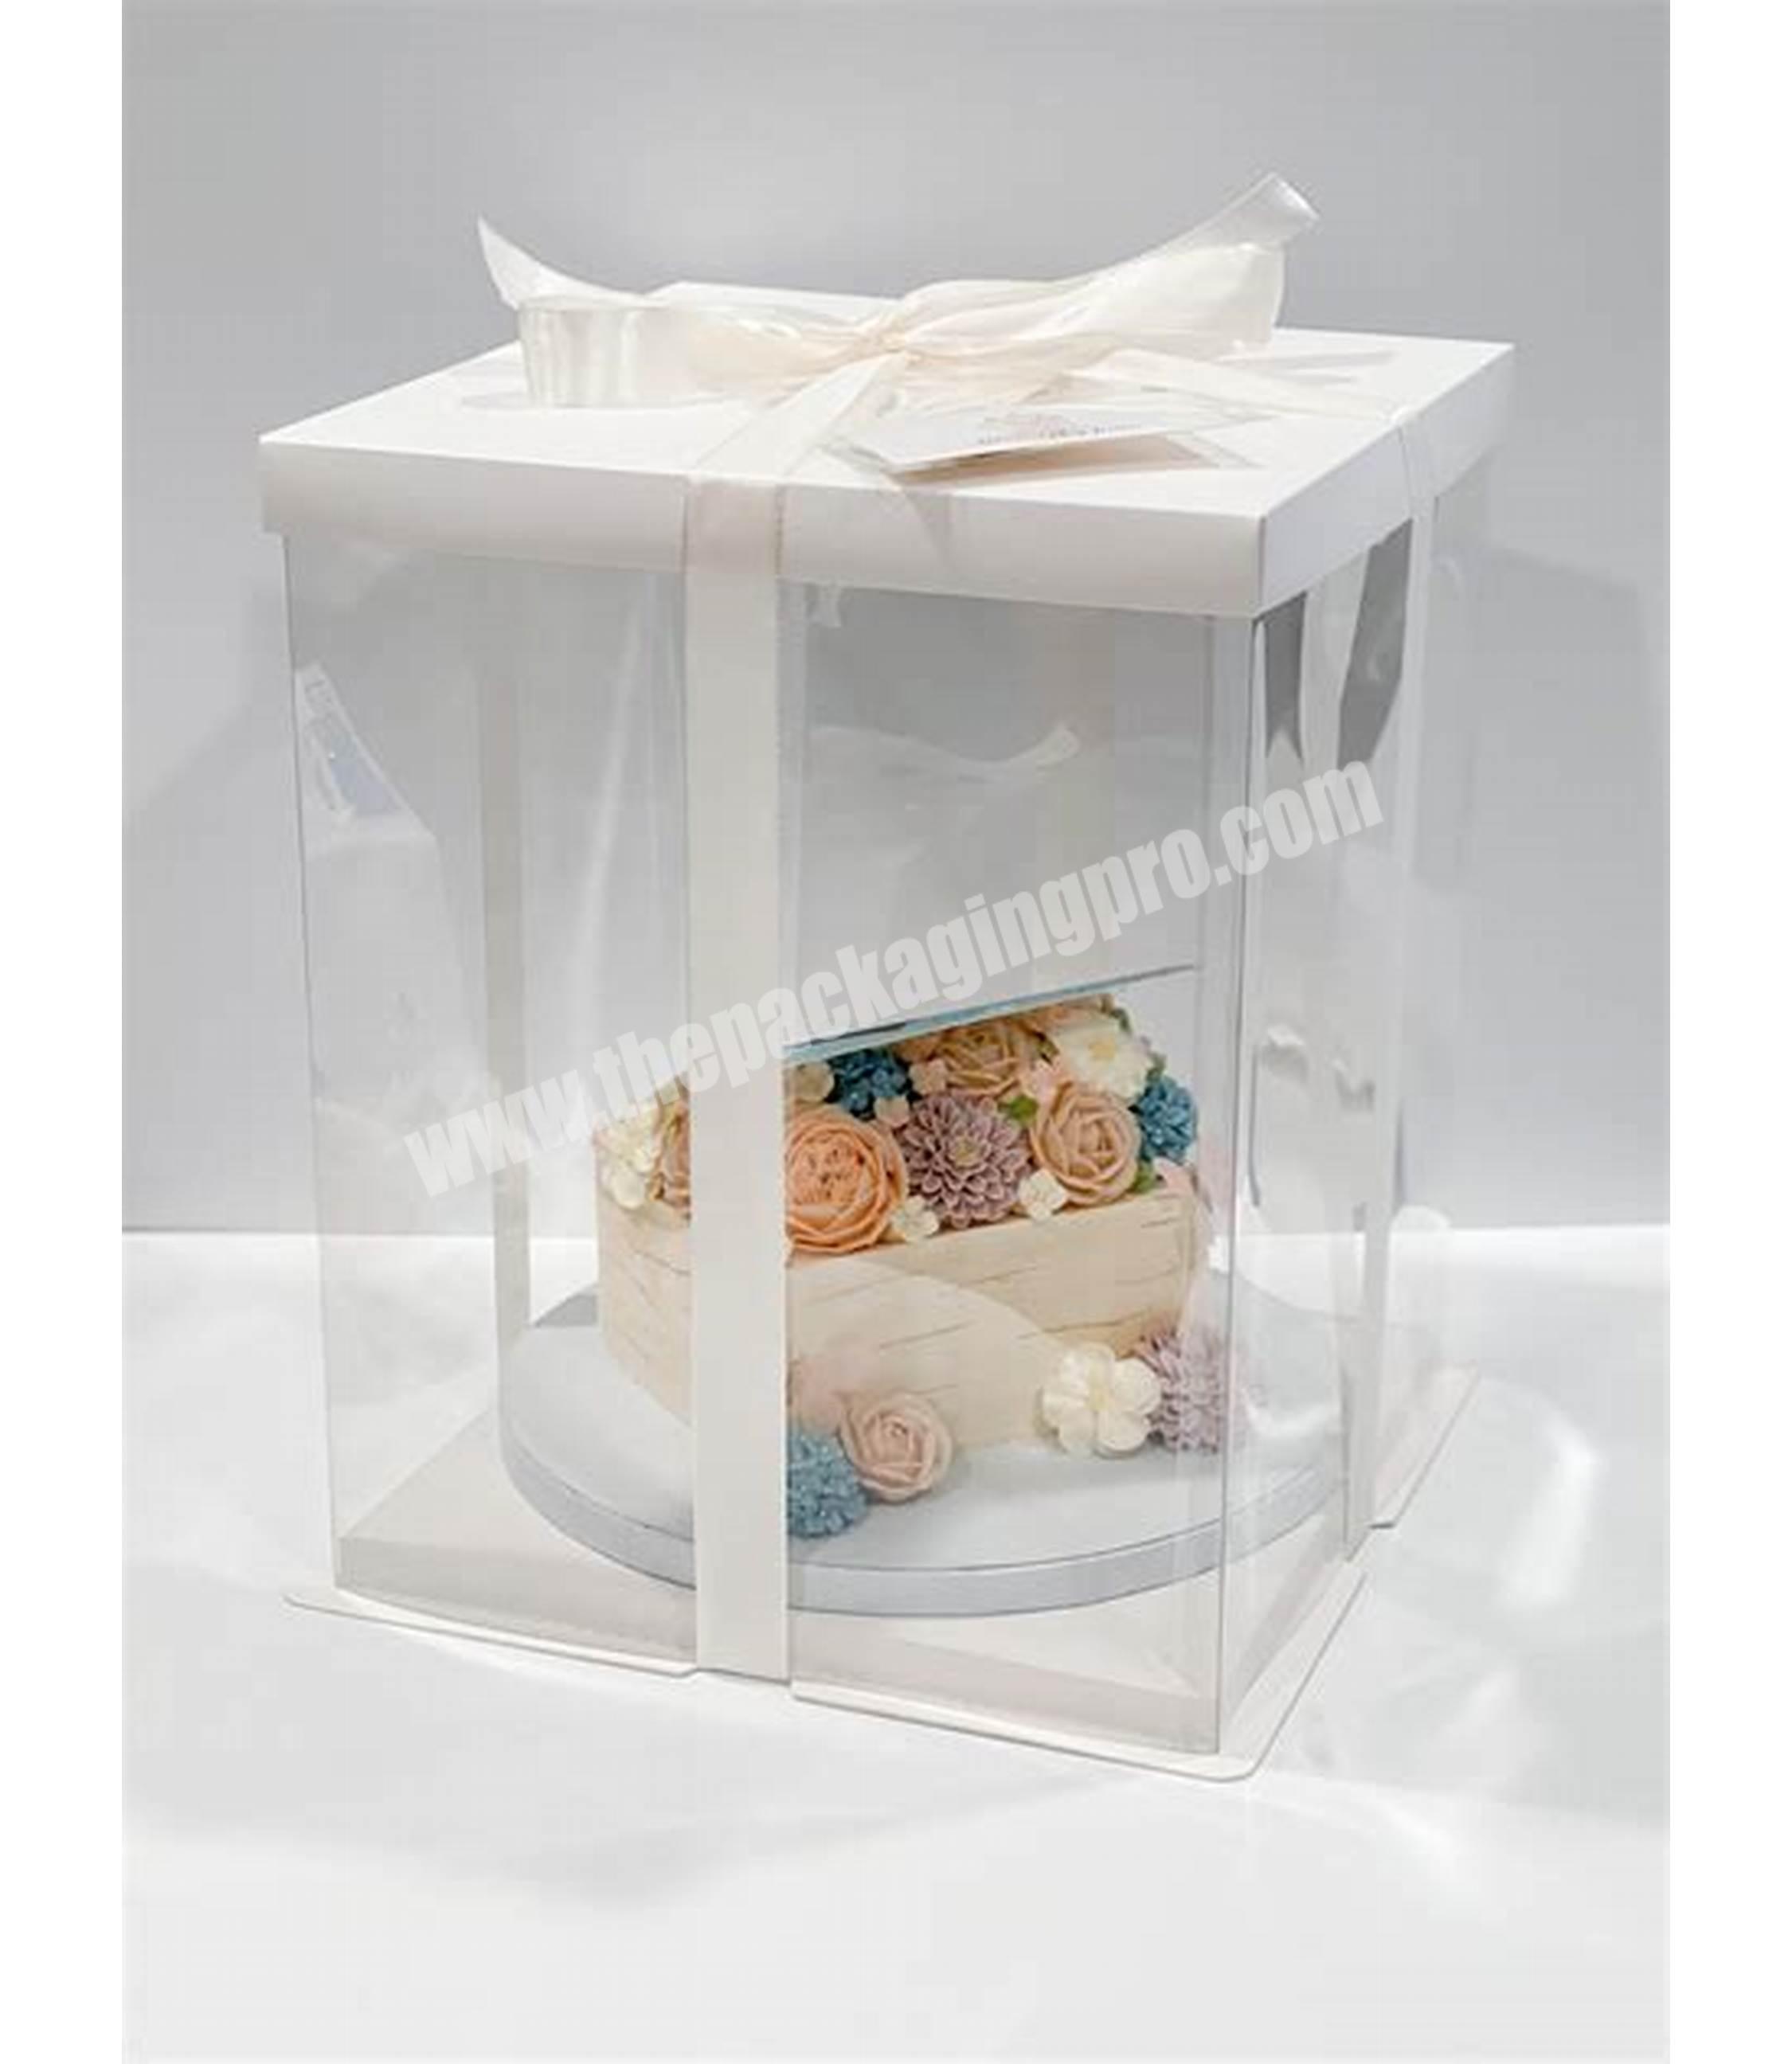 KINSUN Custom christmas wedding cake pop boxes in bulk wholesale for sale cake box with window transparent clear cup cake box